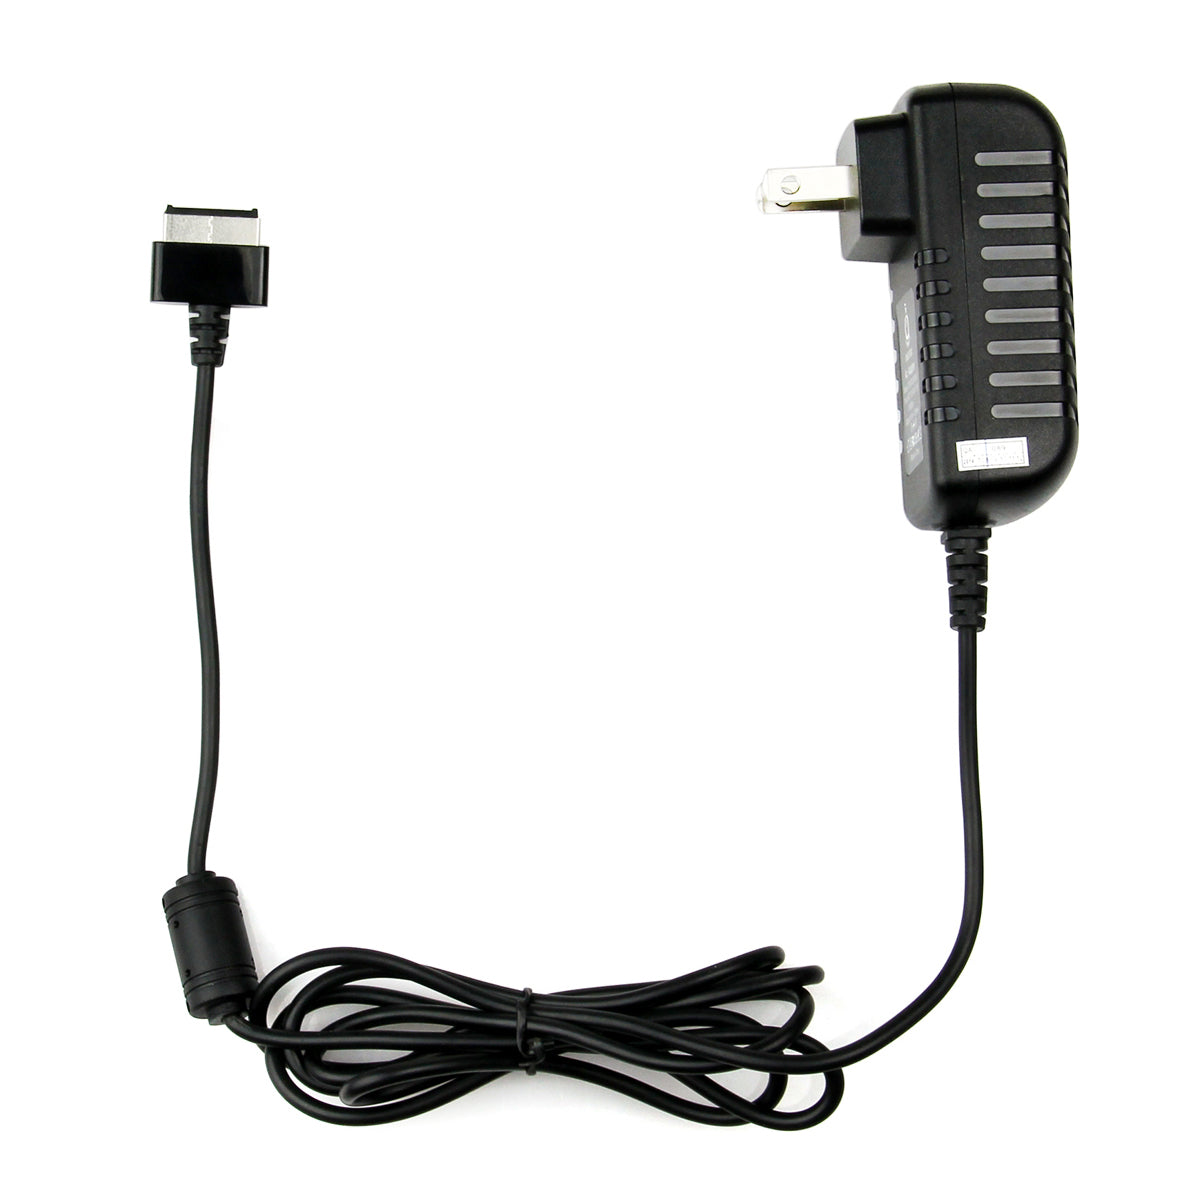 AC Adapter Charger for ASUS TF700T-C1-GR Eee Pad.